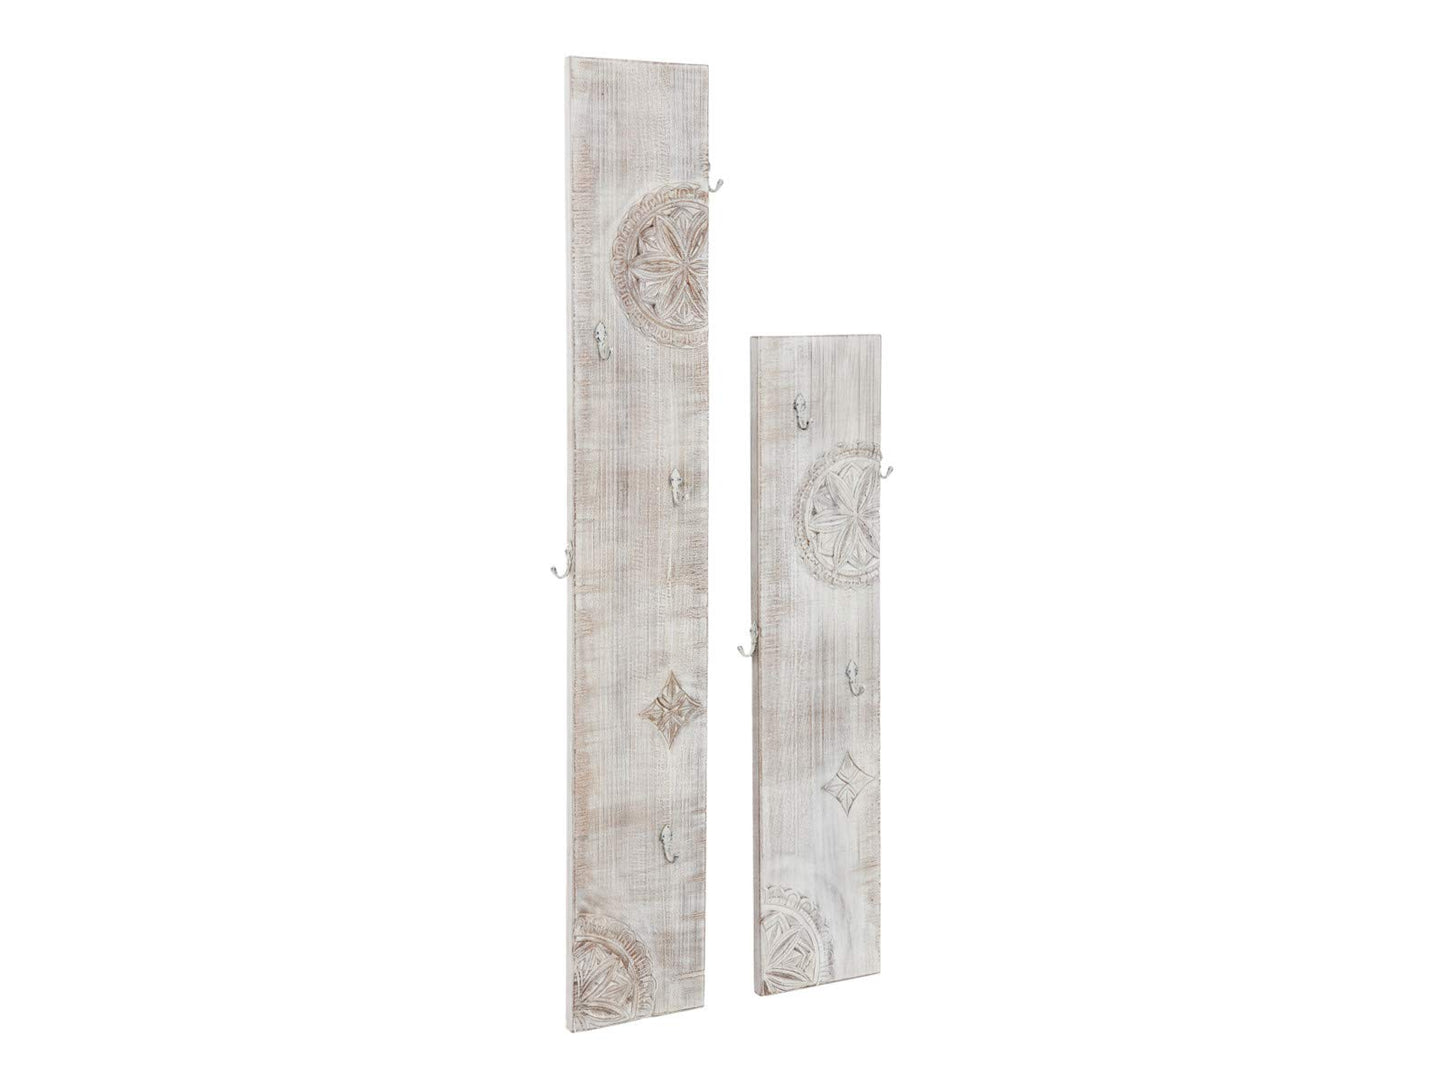 Carved Hook Board Set, Distressed White Finish